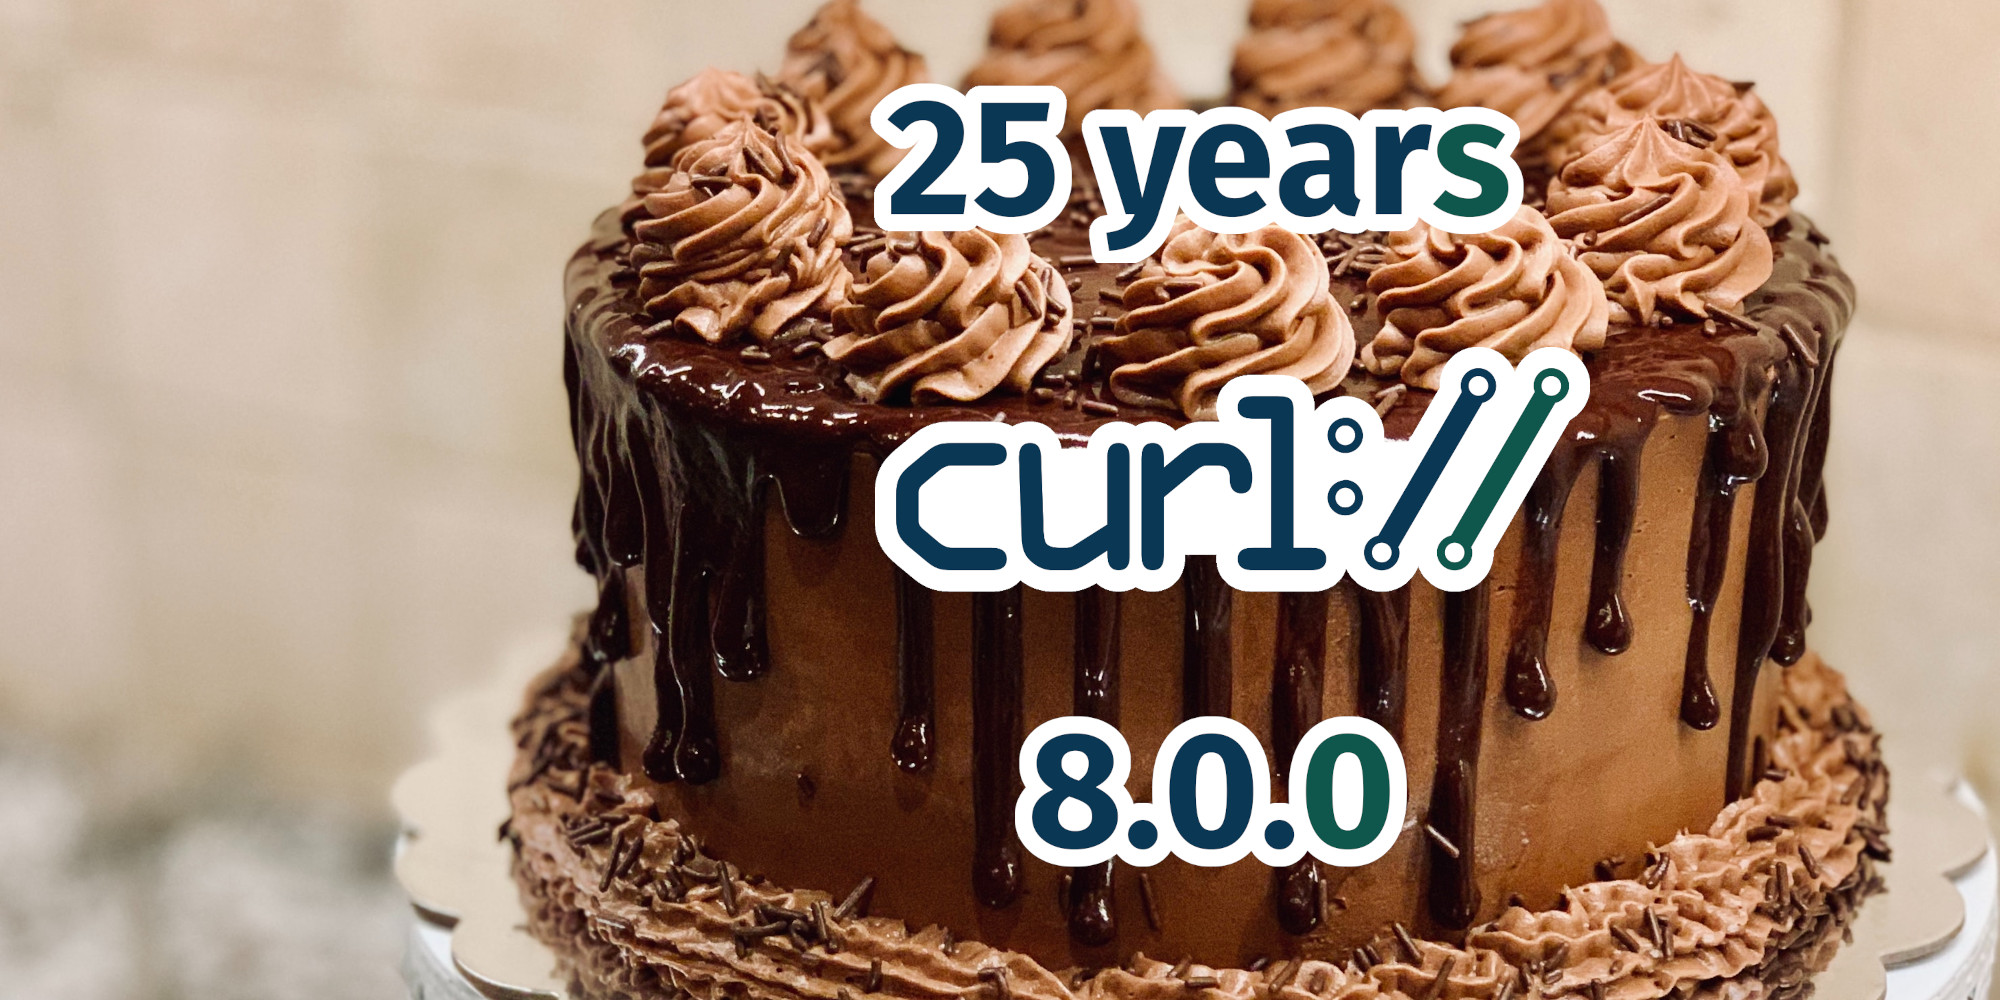 curl 8.0.0 is here